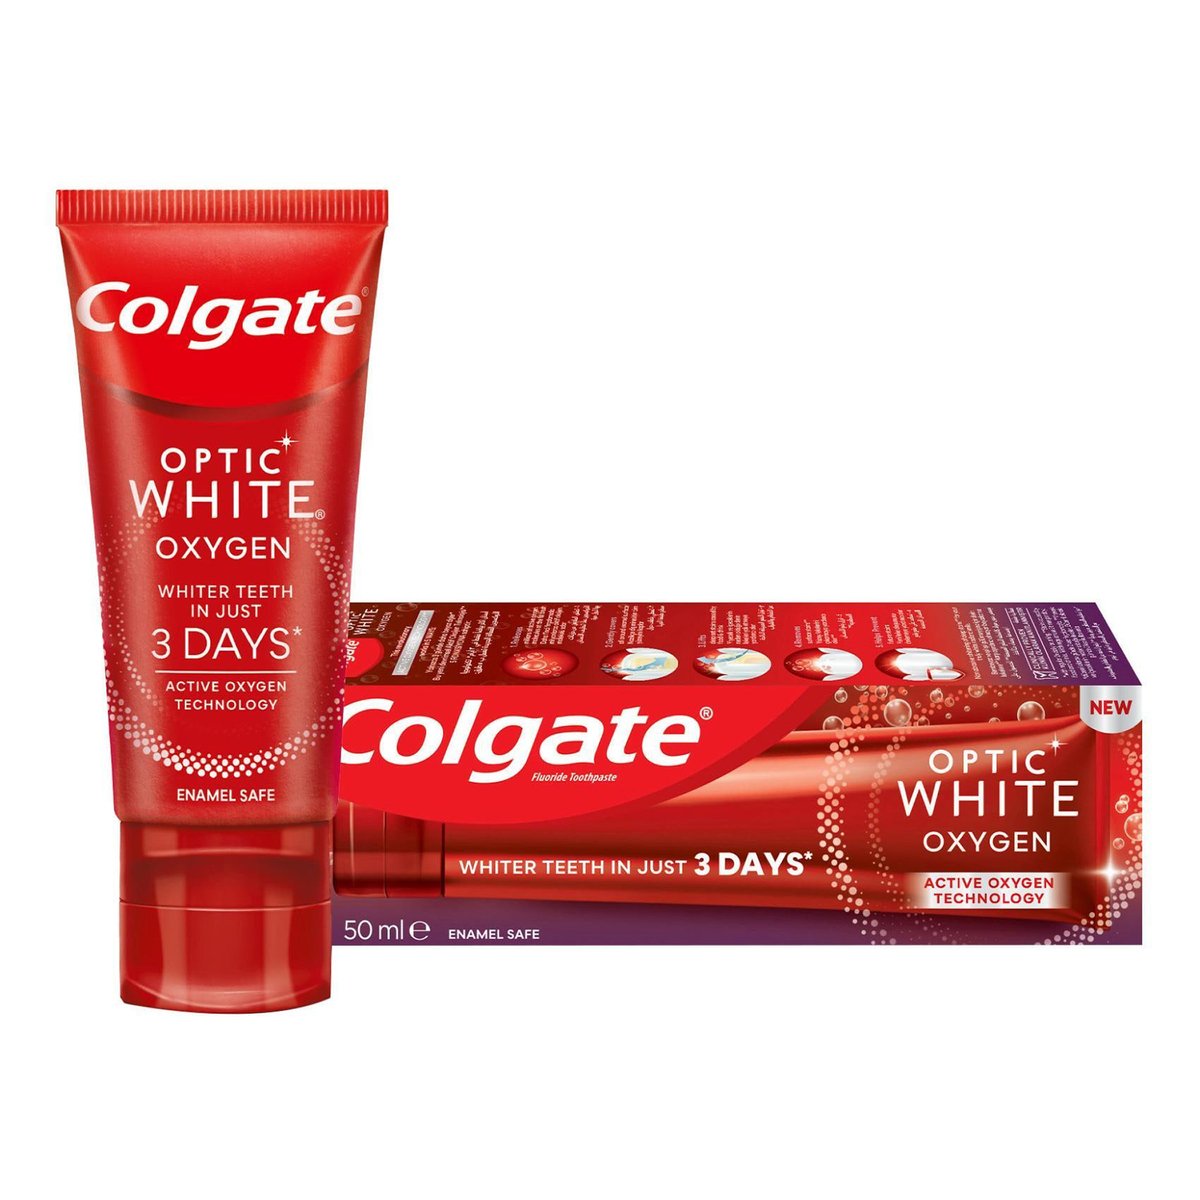 Colgate Optic White Oxygen Toothpaste Value Pack 50 ml